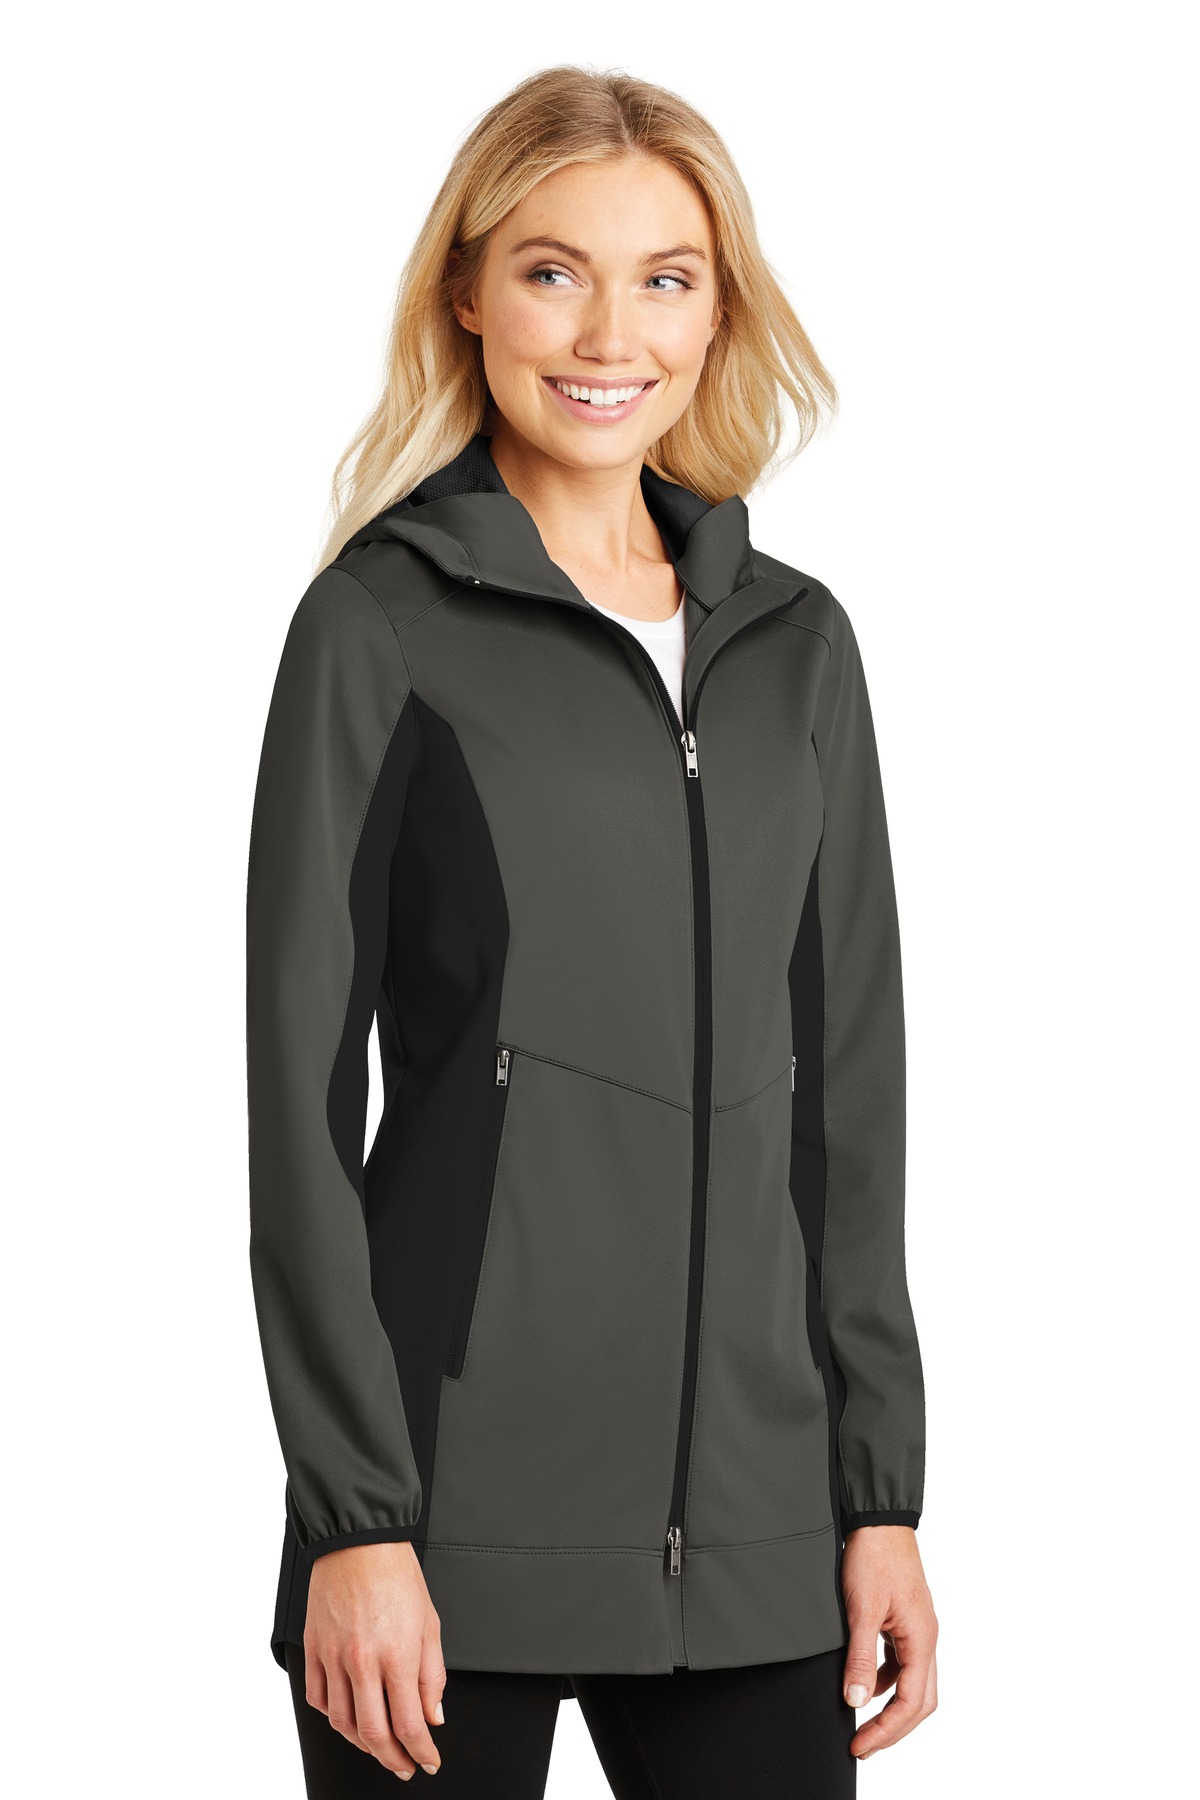 Port Authority Ladies Active Hooded Soft Shell Jacket-L (Grey Steel/ Deep Black) - image 4 of 6